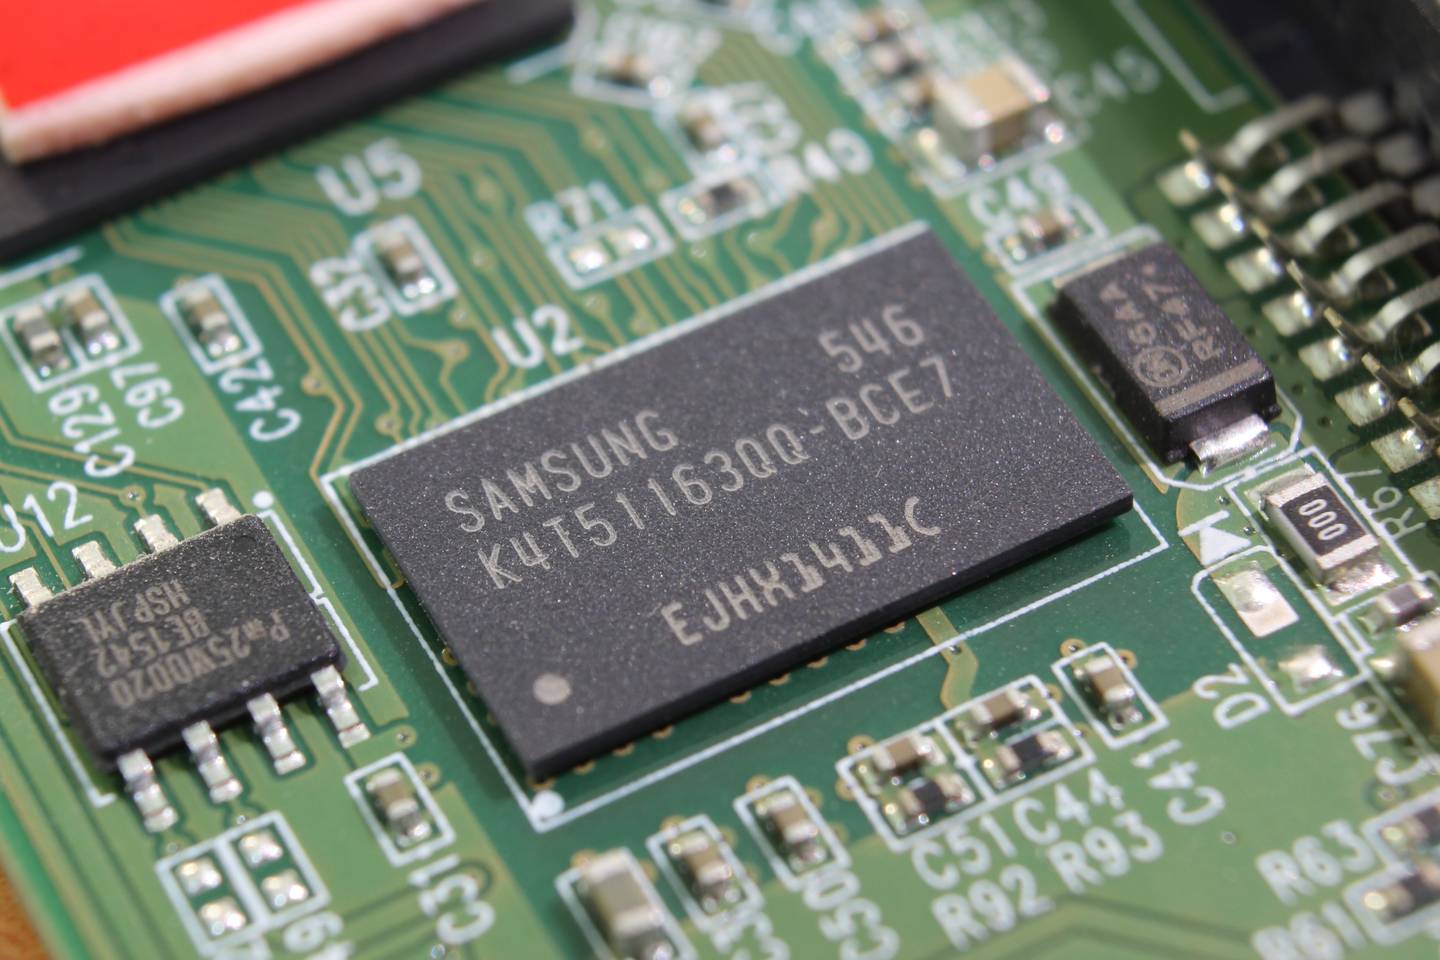 The United States will give Samsung $6.4 billion to finance a semiconductor factory in Texas